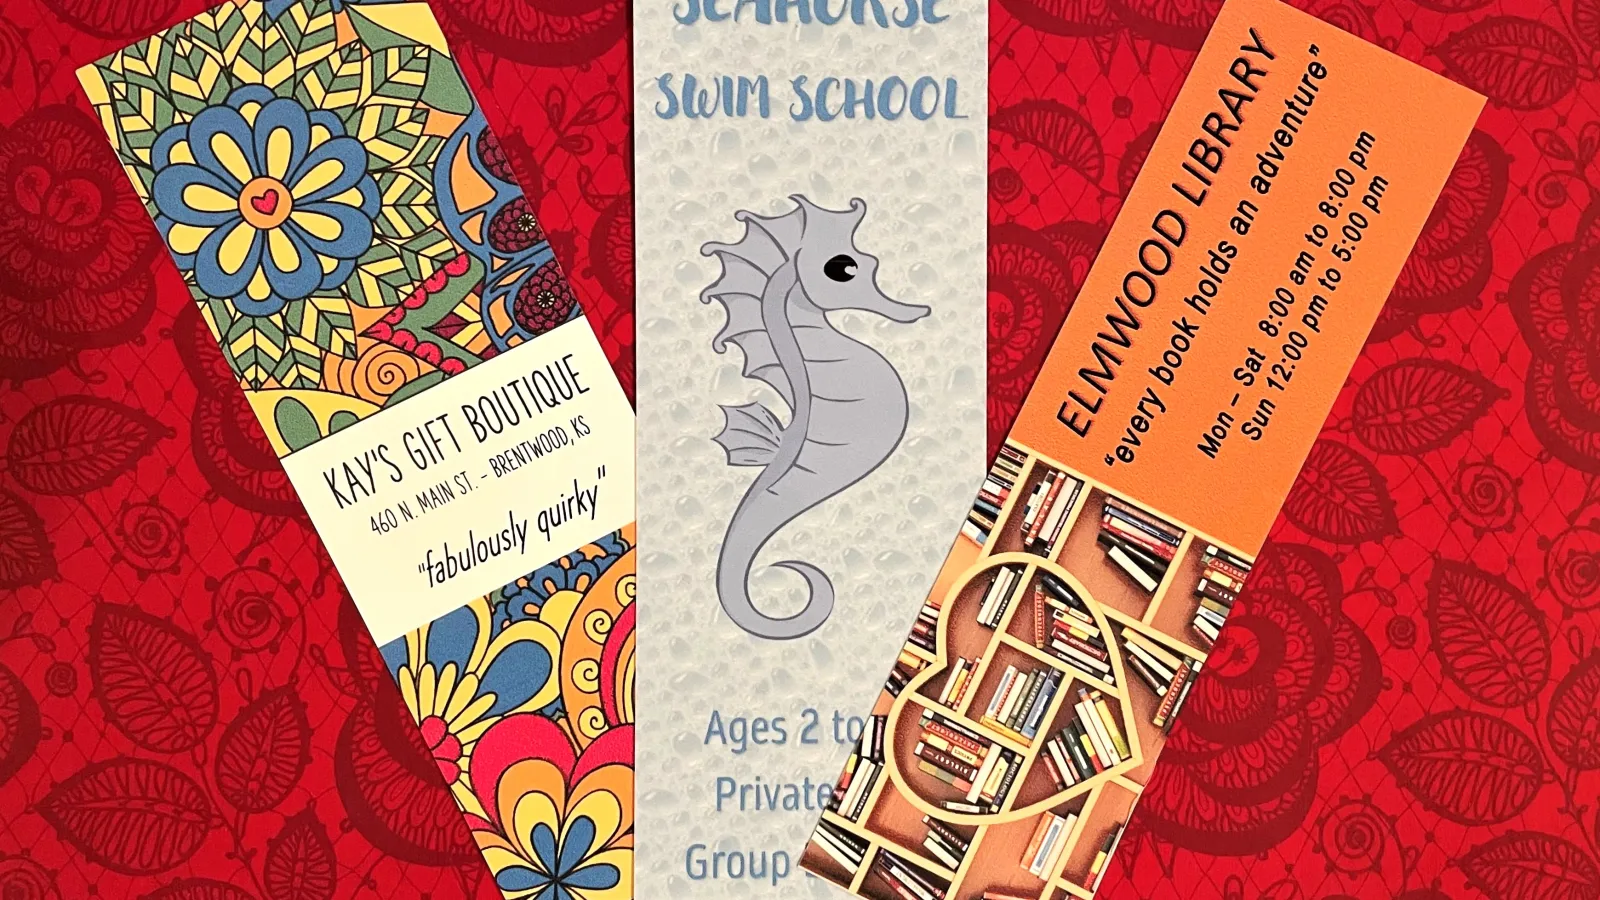 Three promotional Bookmarks against a red background